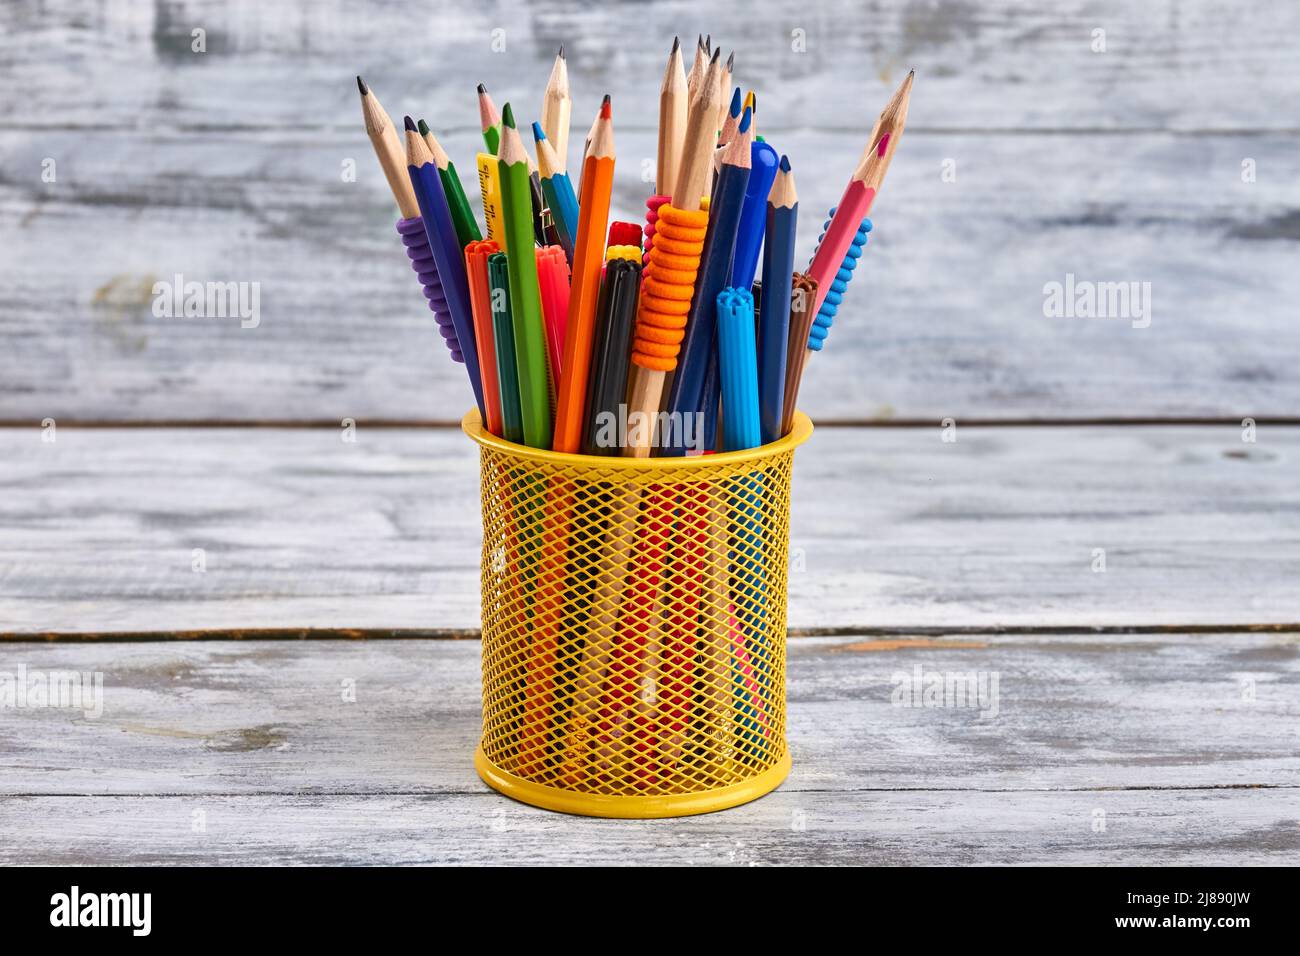 Yellow holder full of pens and pencils. White desk background. Stock Photo